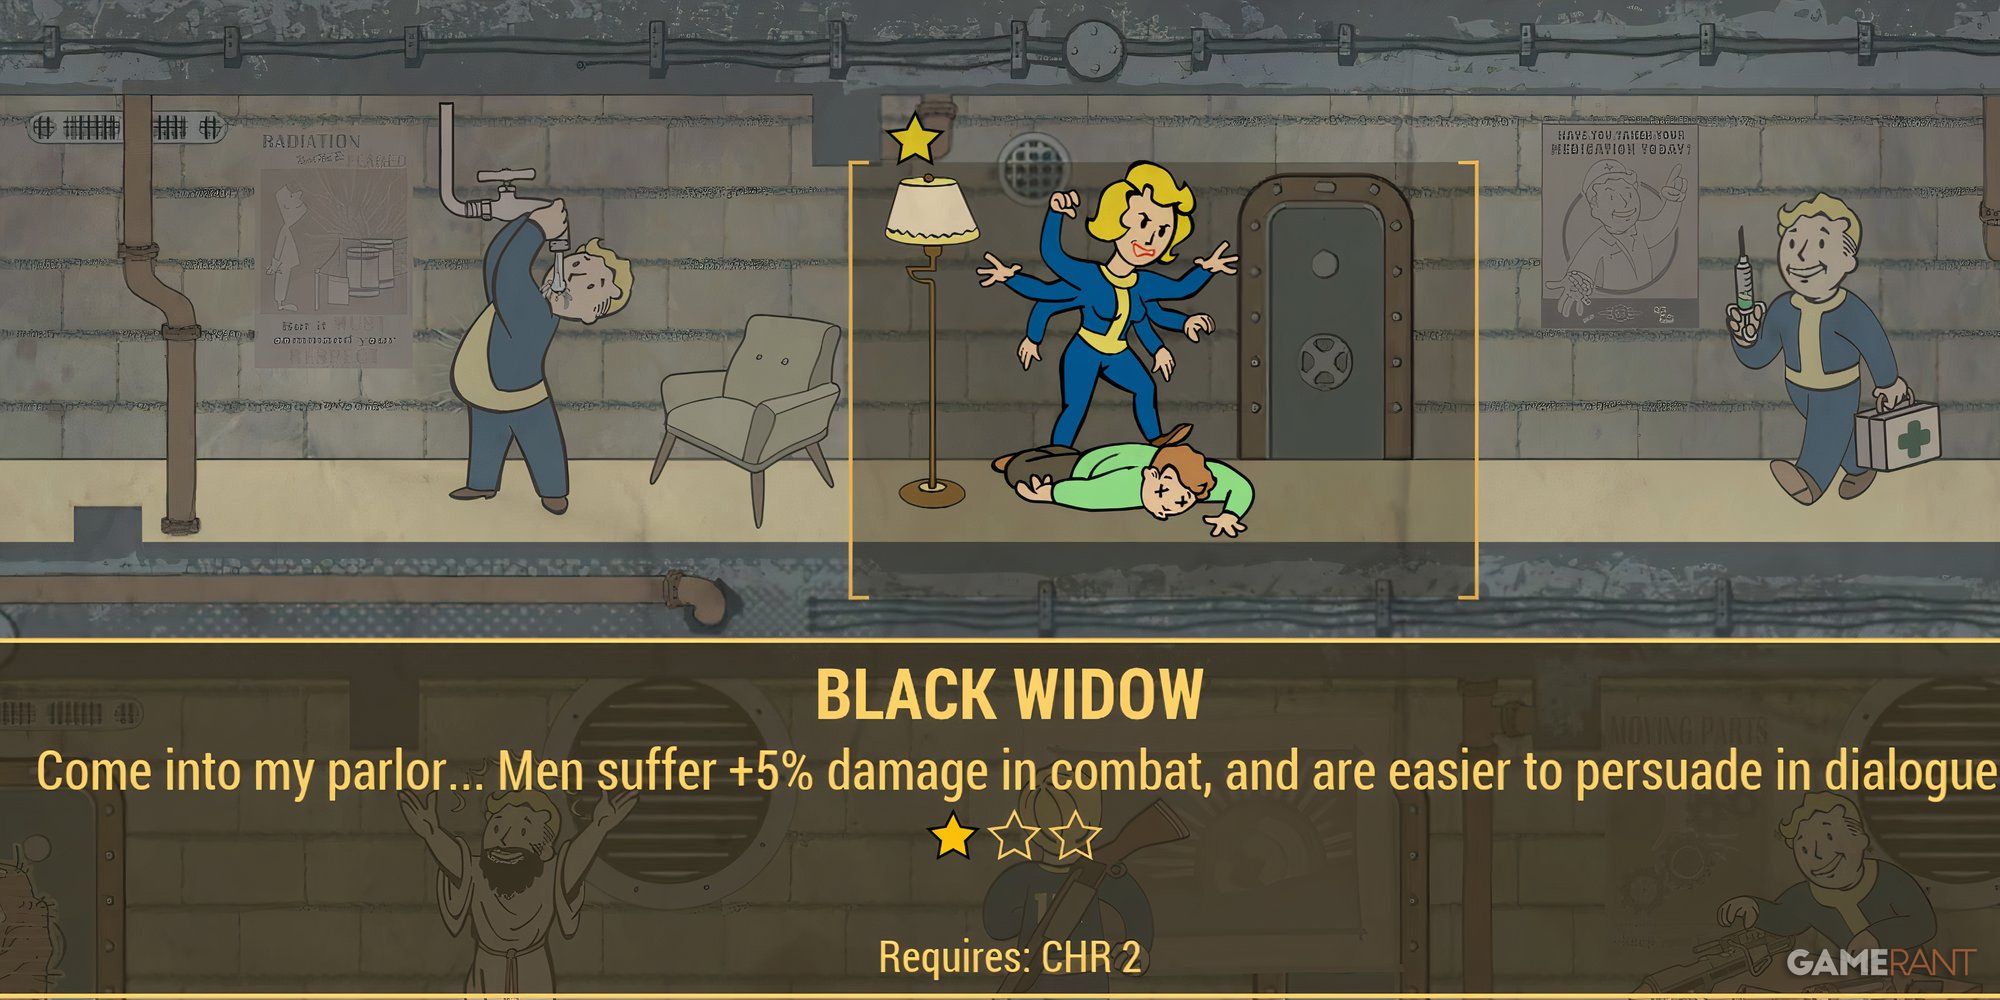 Black Widow Perk Icon - A cartoonized woman with 5 arms stands over a man she killed